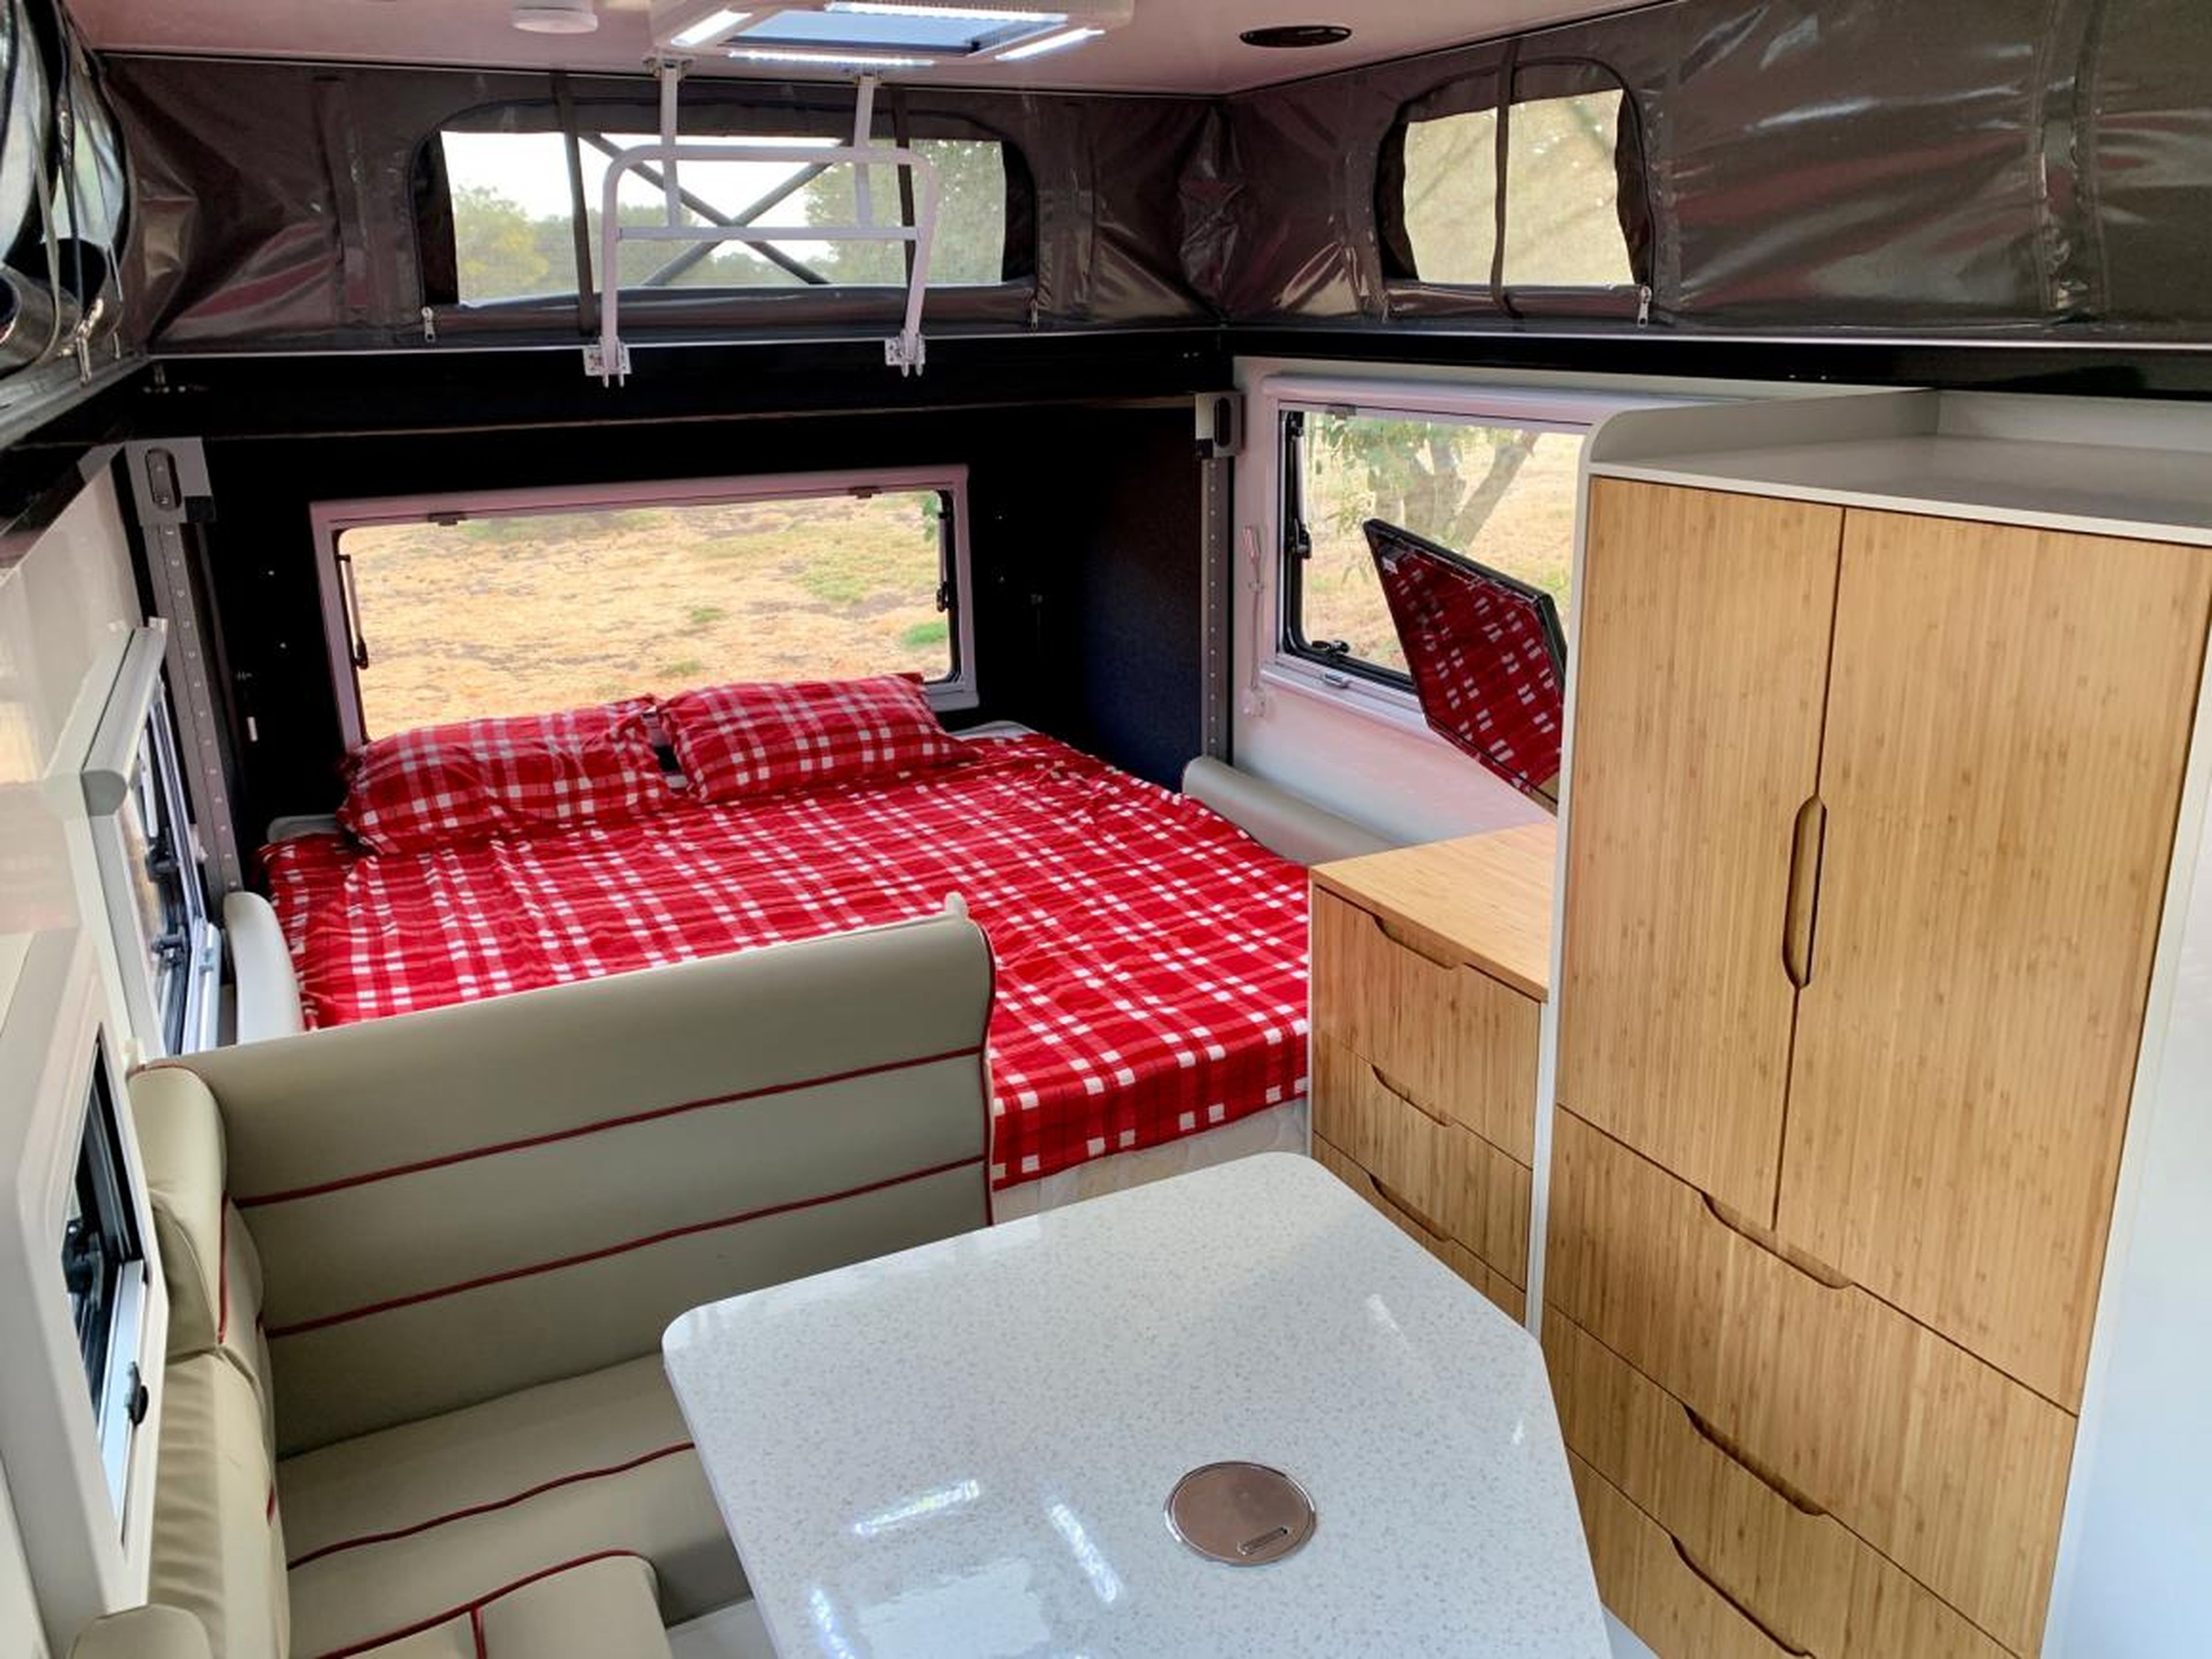 The interior has a king bed and two twin bunk beds.